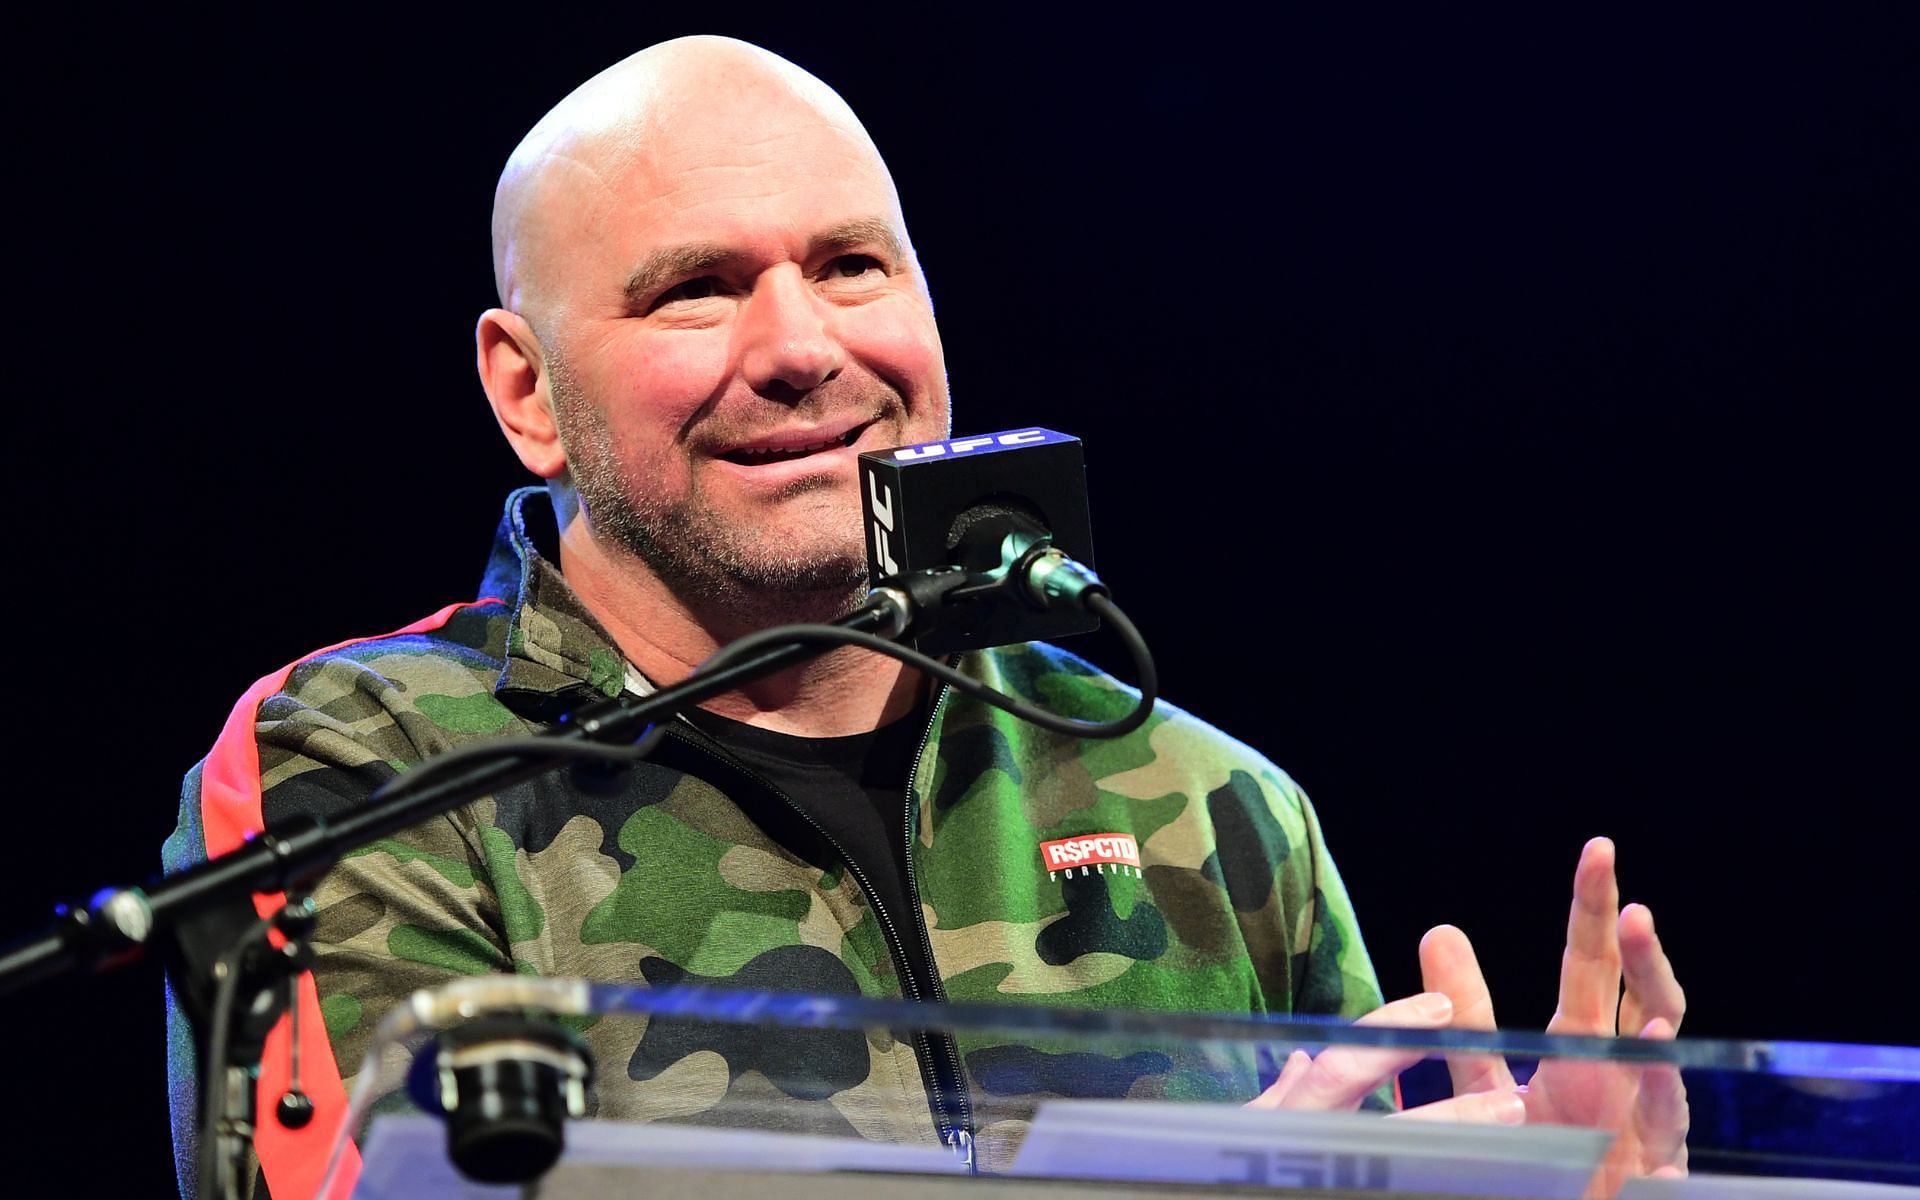 UFC head honcho Dana White has never shied away from speaking his mind against his rivals [Image courtesy: Getty Images]